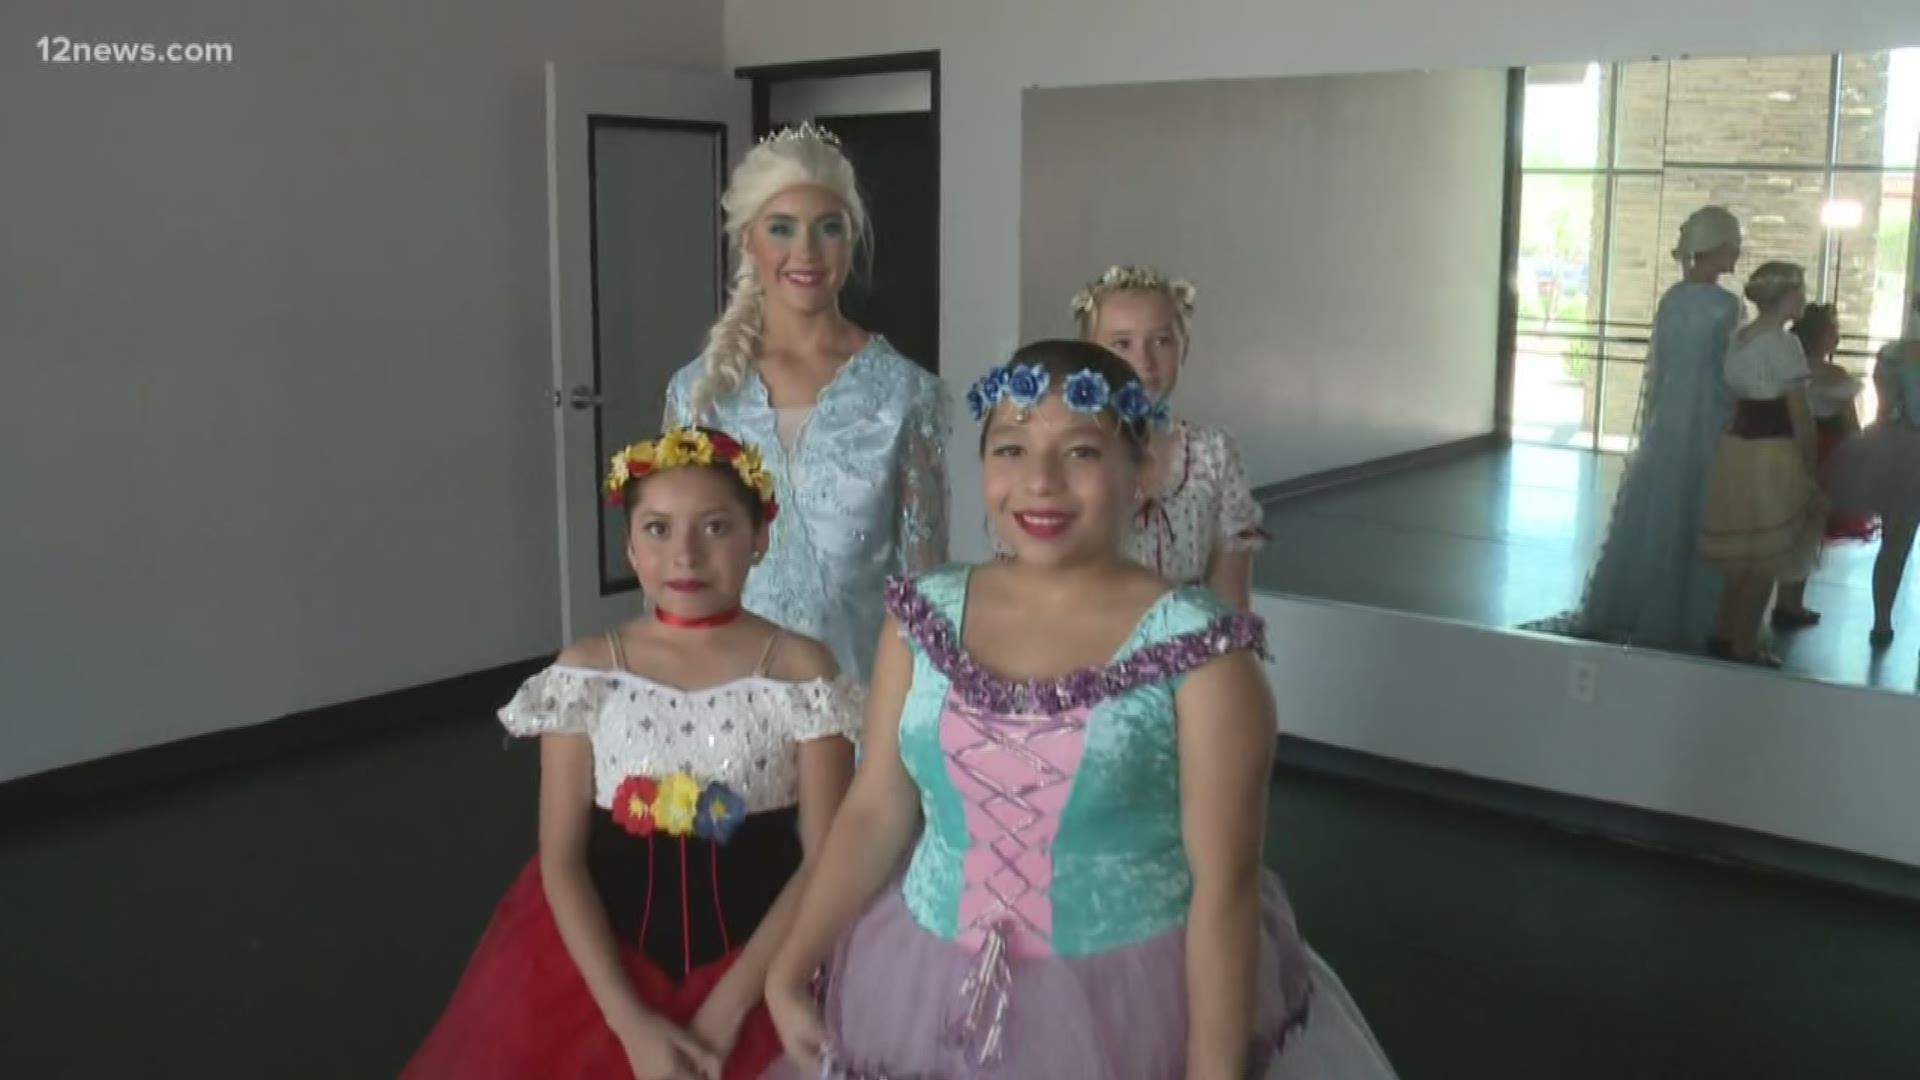 "Let It Go" with a local youth theatre group that is taking the stage this weekend to perform a junior version of Disney's "Frozen". Check out a preview of the cool production/